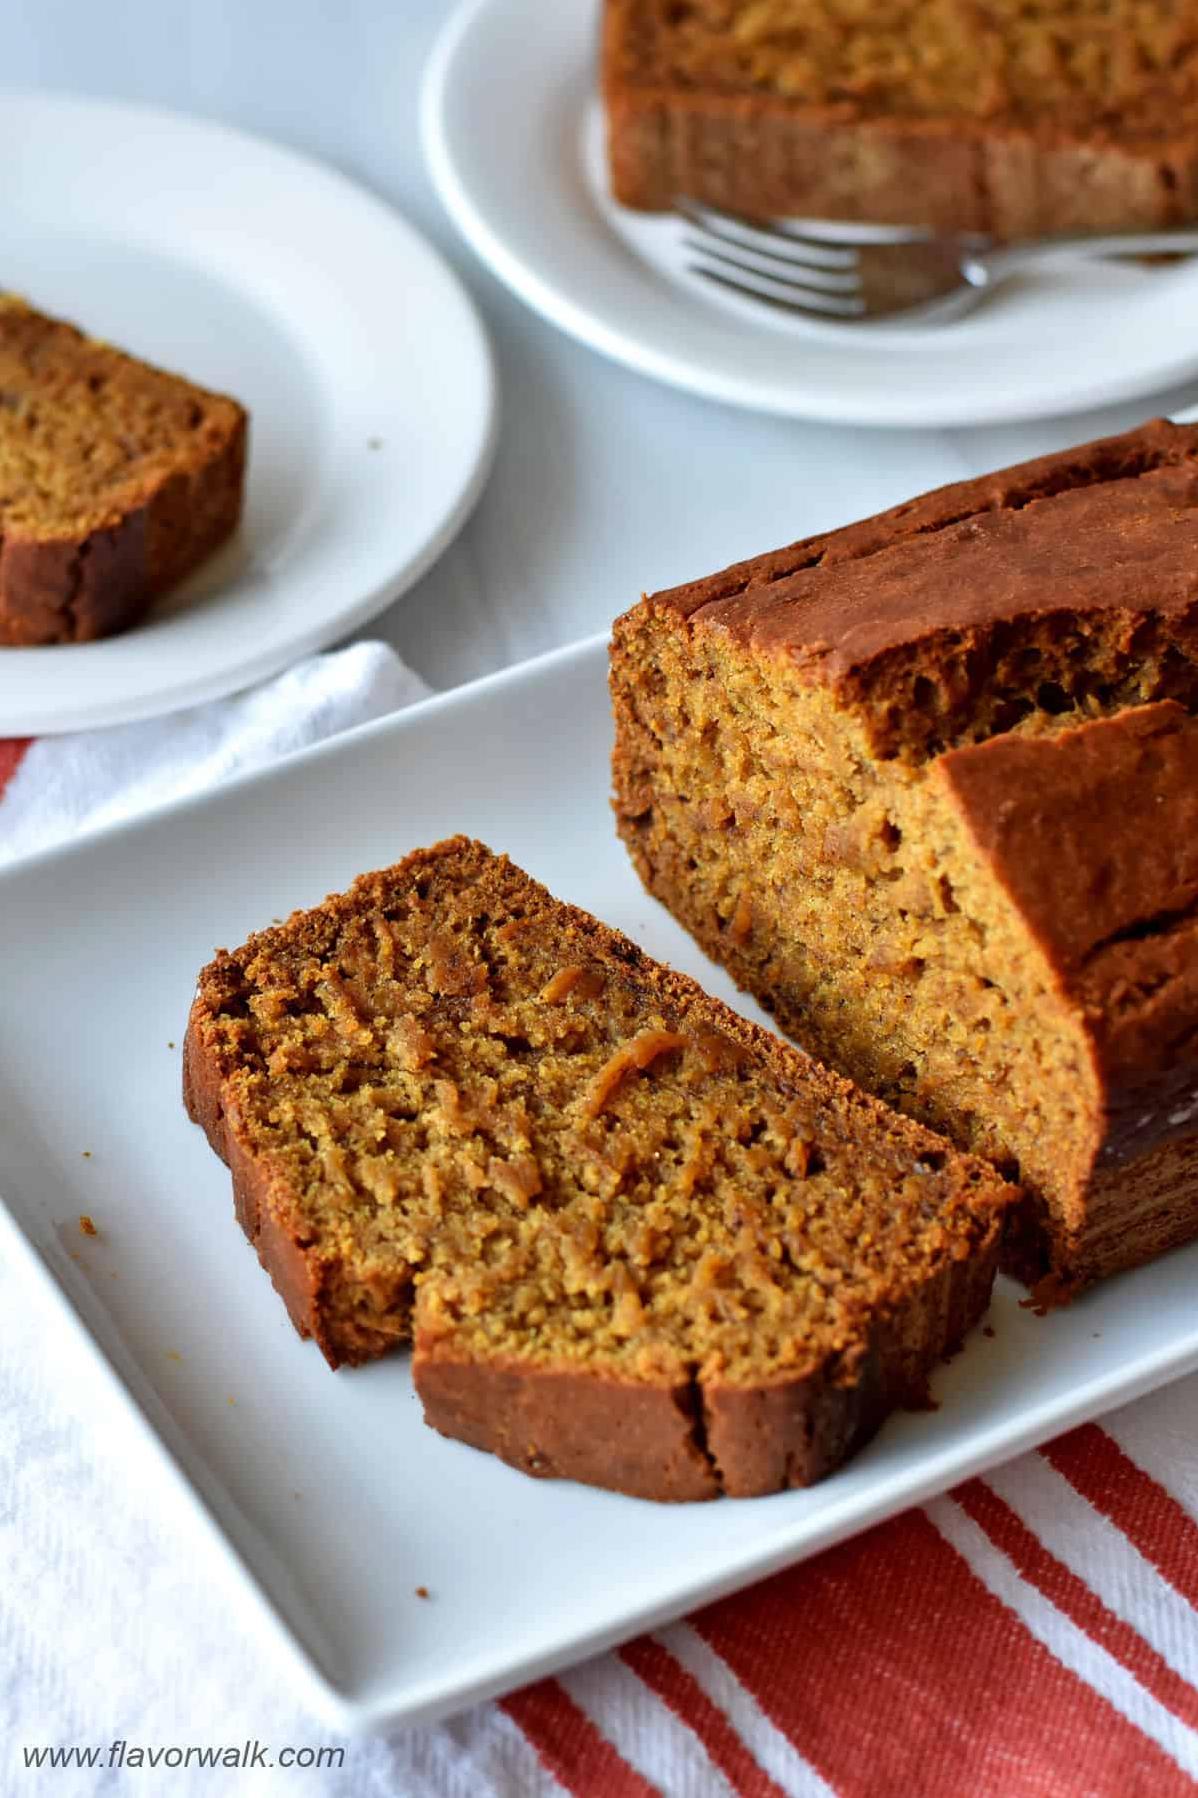  Soft and tender, this pumpkin banana bread is the perfect fall treat.